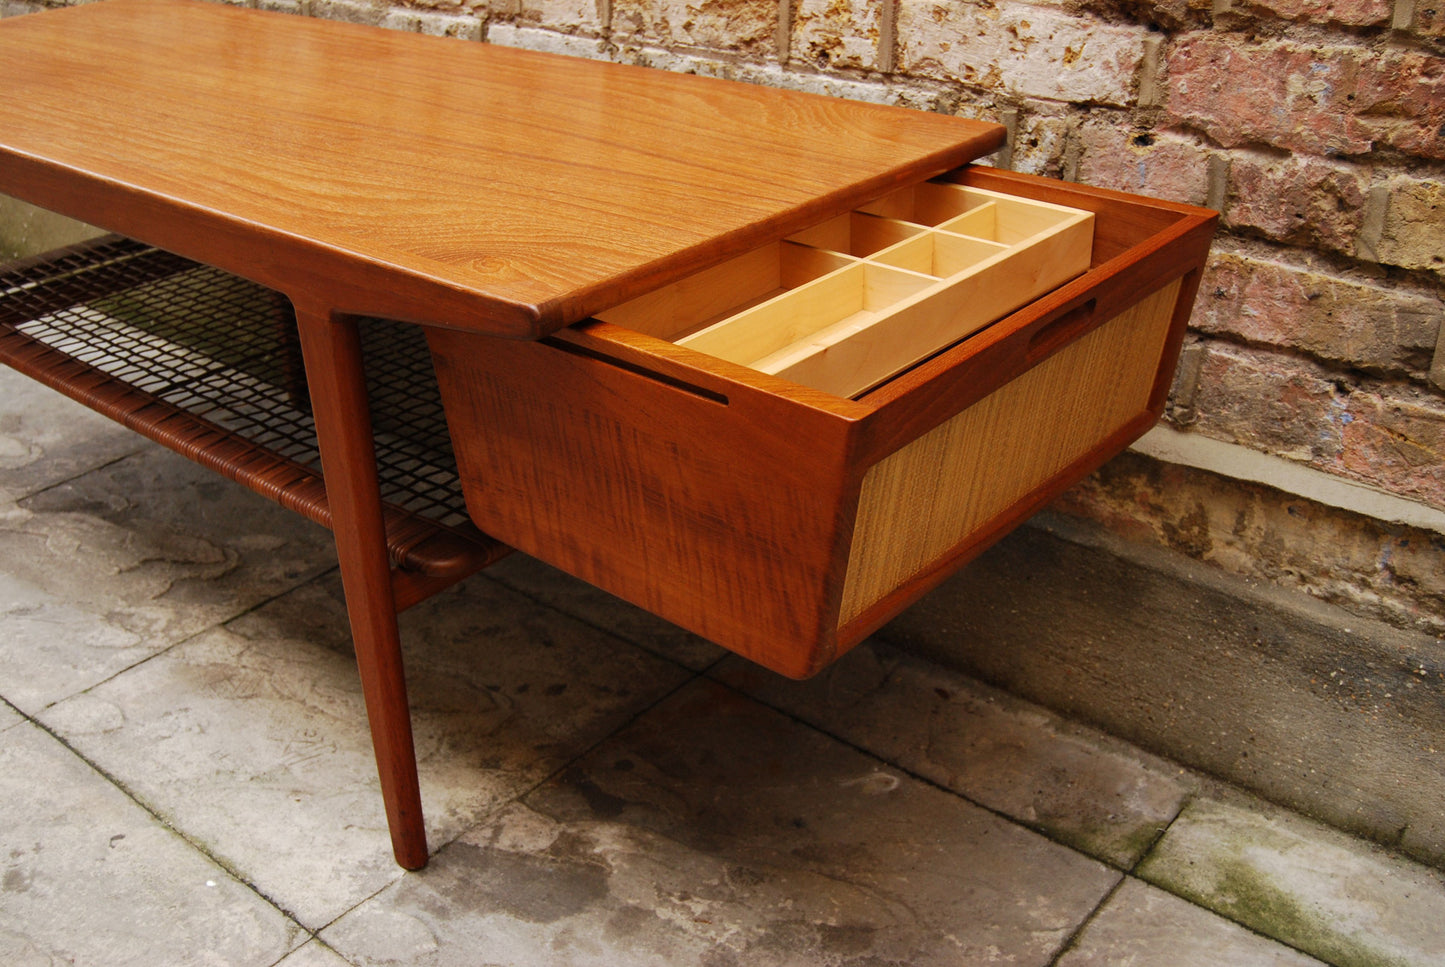 Teak coffee table with drawer